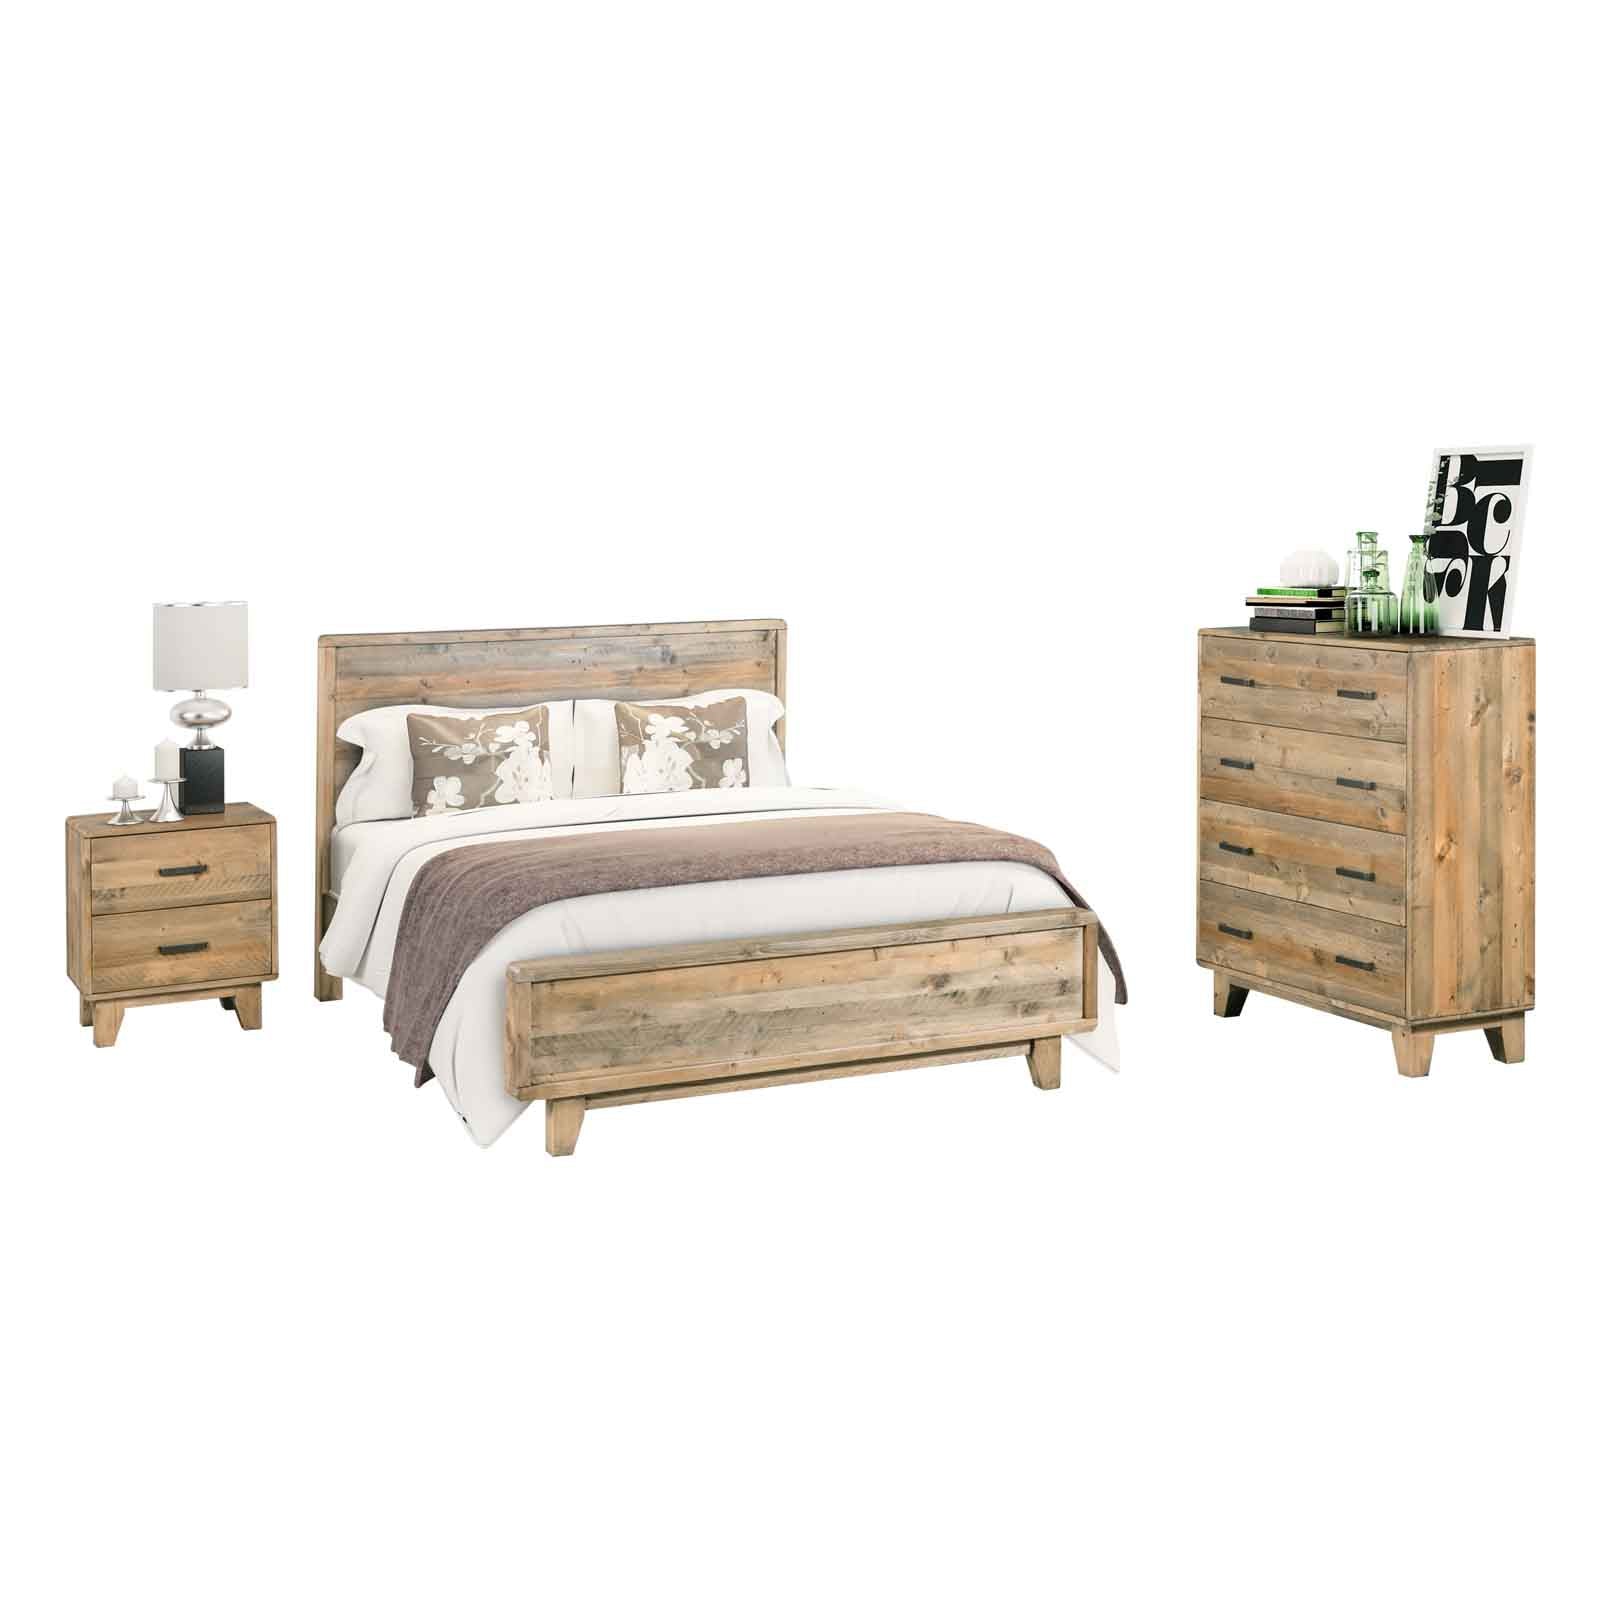 4 Pieces Bedroom Suite Double Size in Solid Wood Antique Design Light Brown Bed, Bedside Table & Tallboy - SILBERSHELL